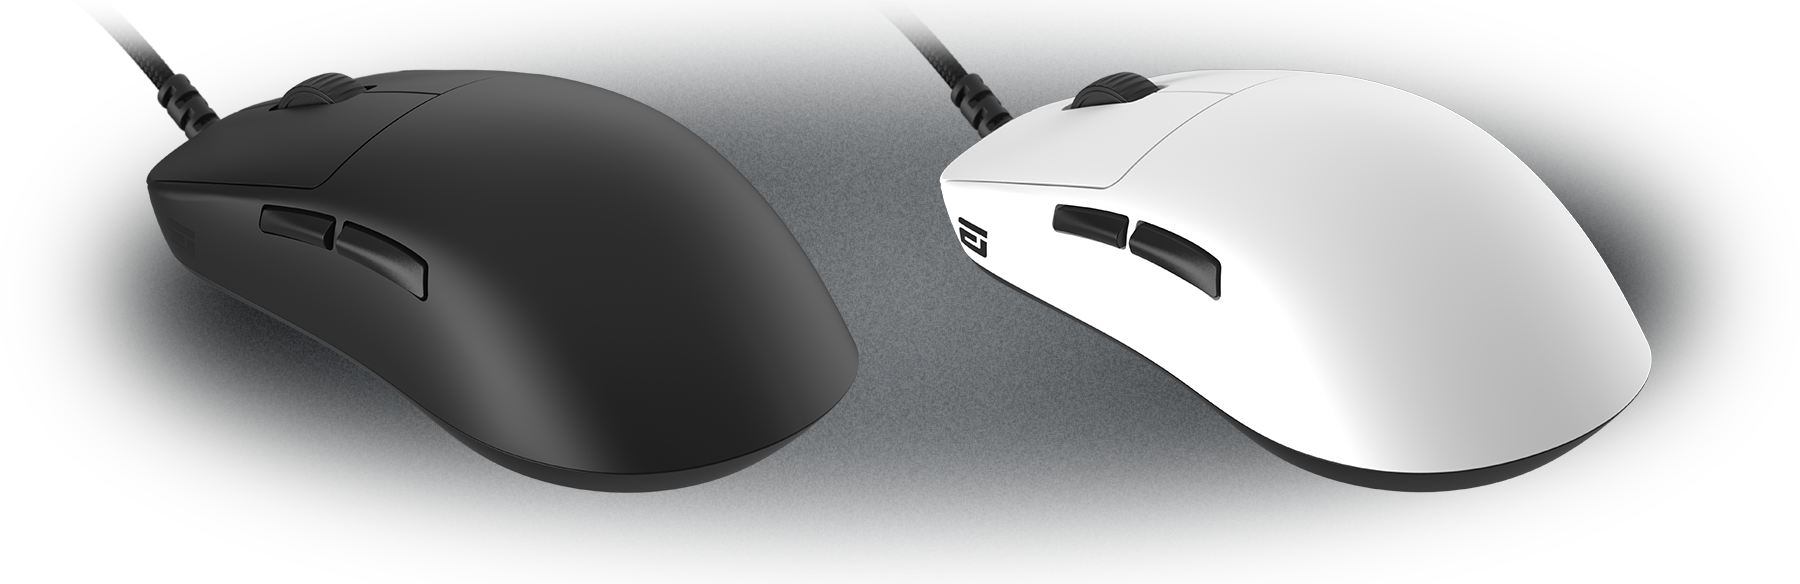 Endgame Gear OP1 8k Gaming Mouse in Black or White